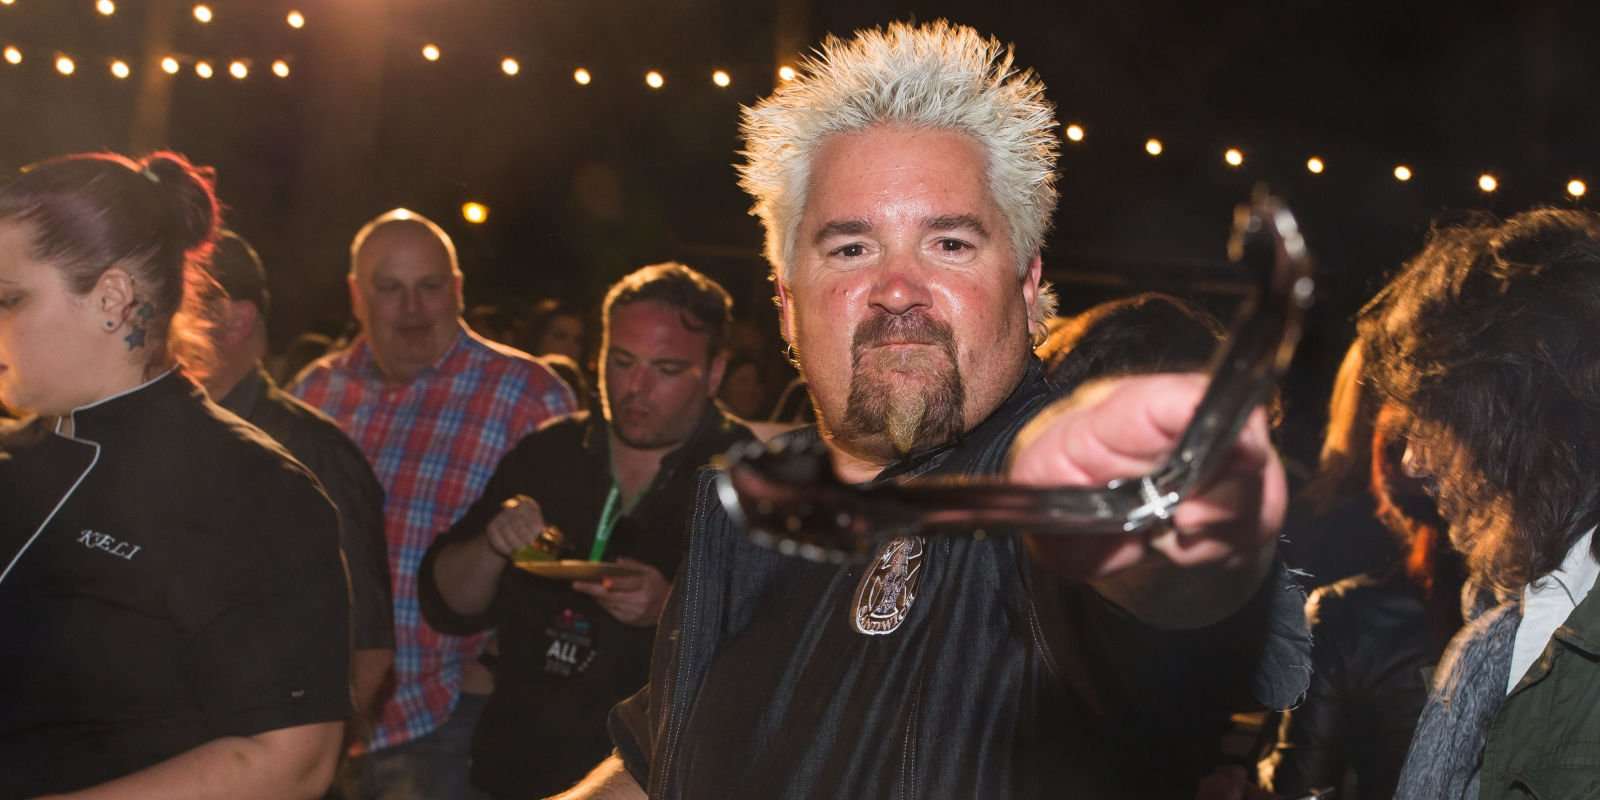 image for 10 Things You Didn't Know About Diners, Drive-Ins And Dives